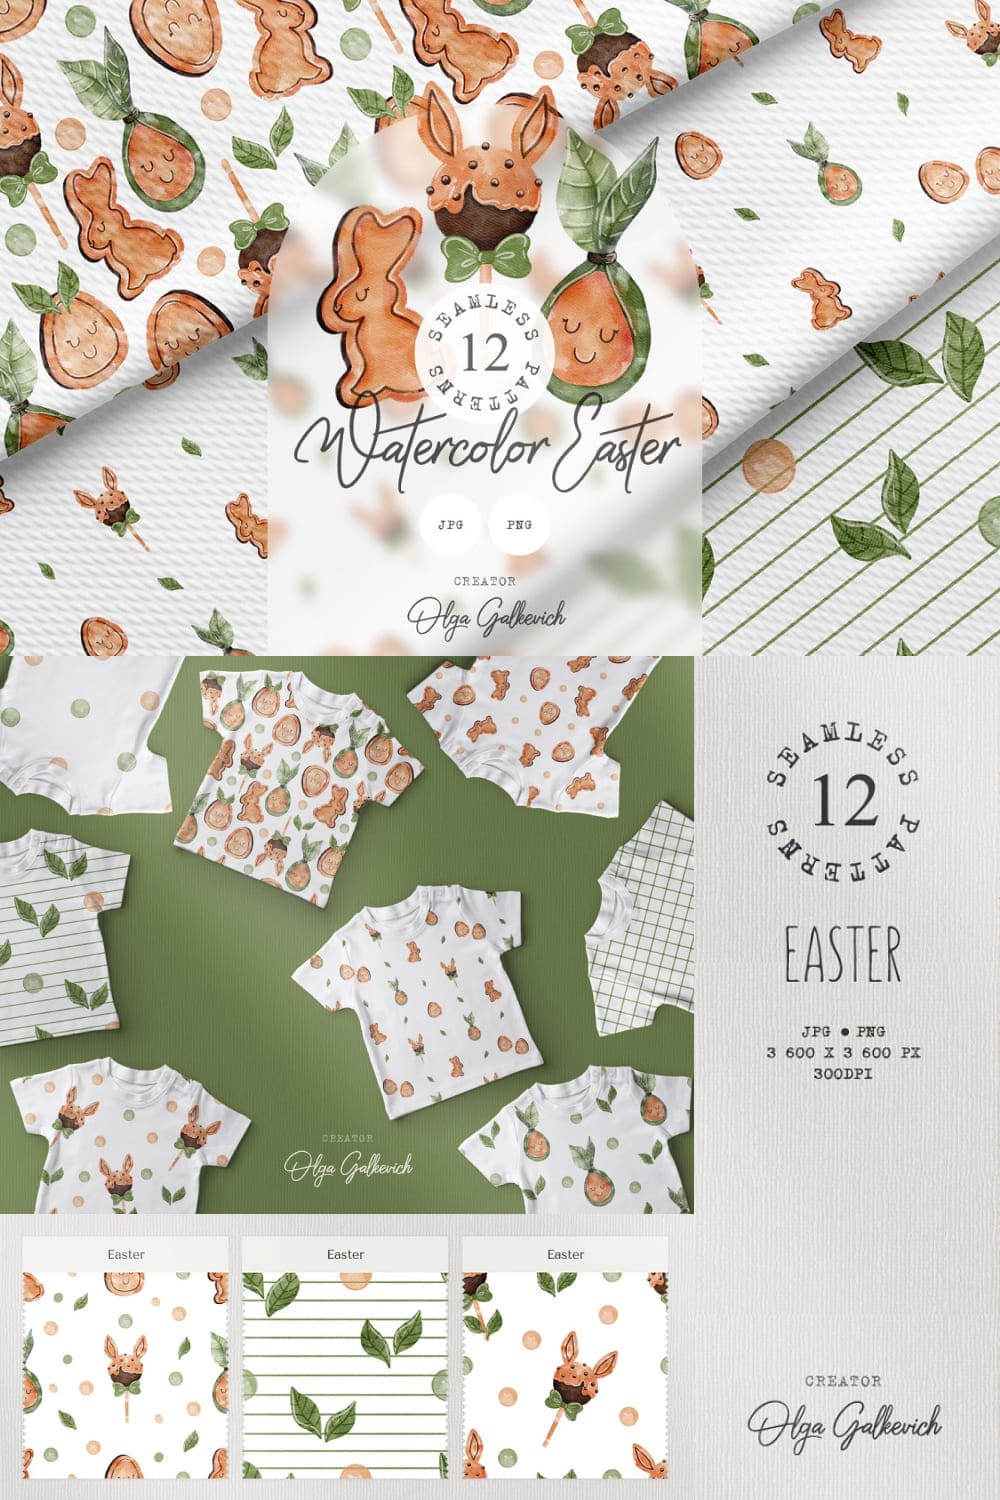 Watercolor Easter seamless pattern - pinterest image preview.